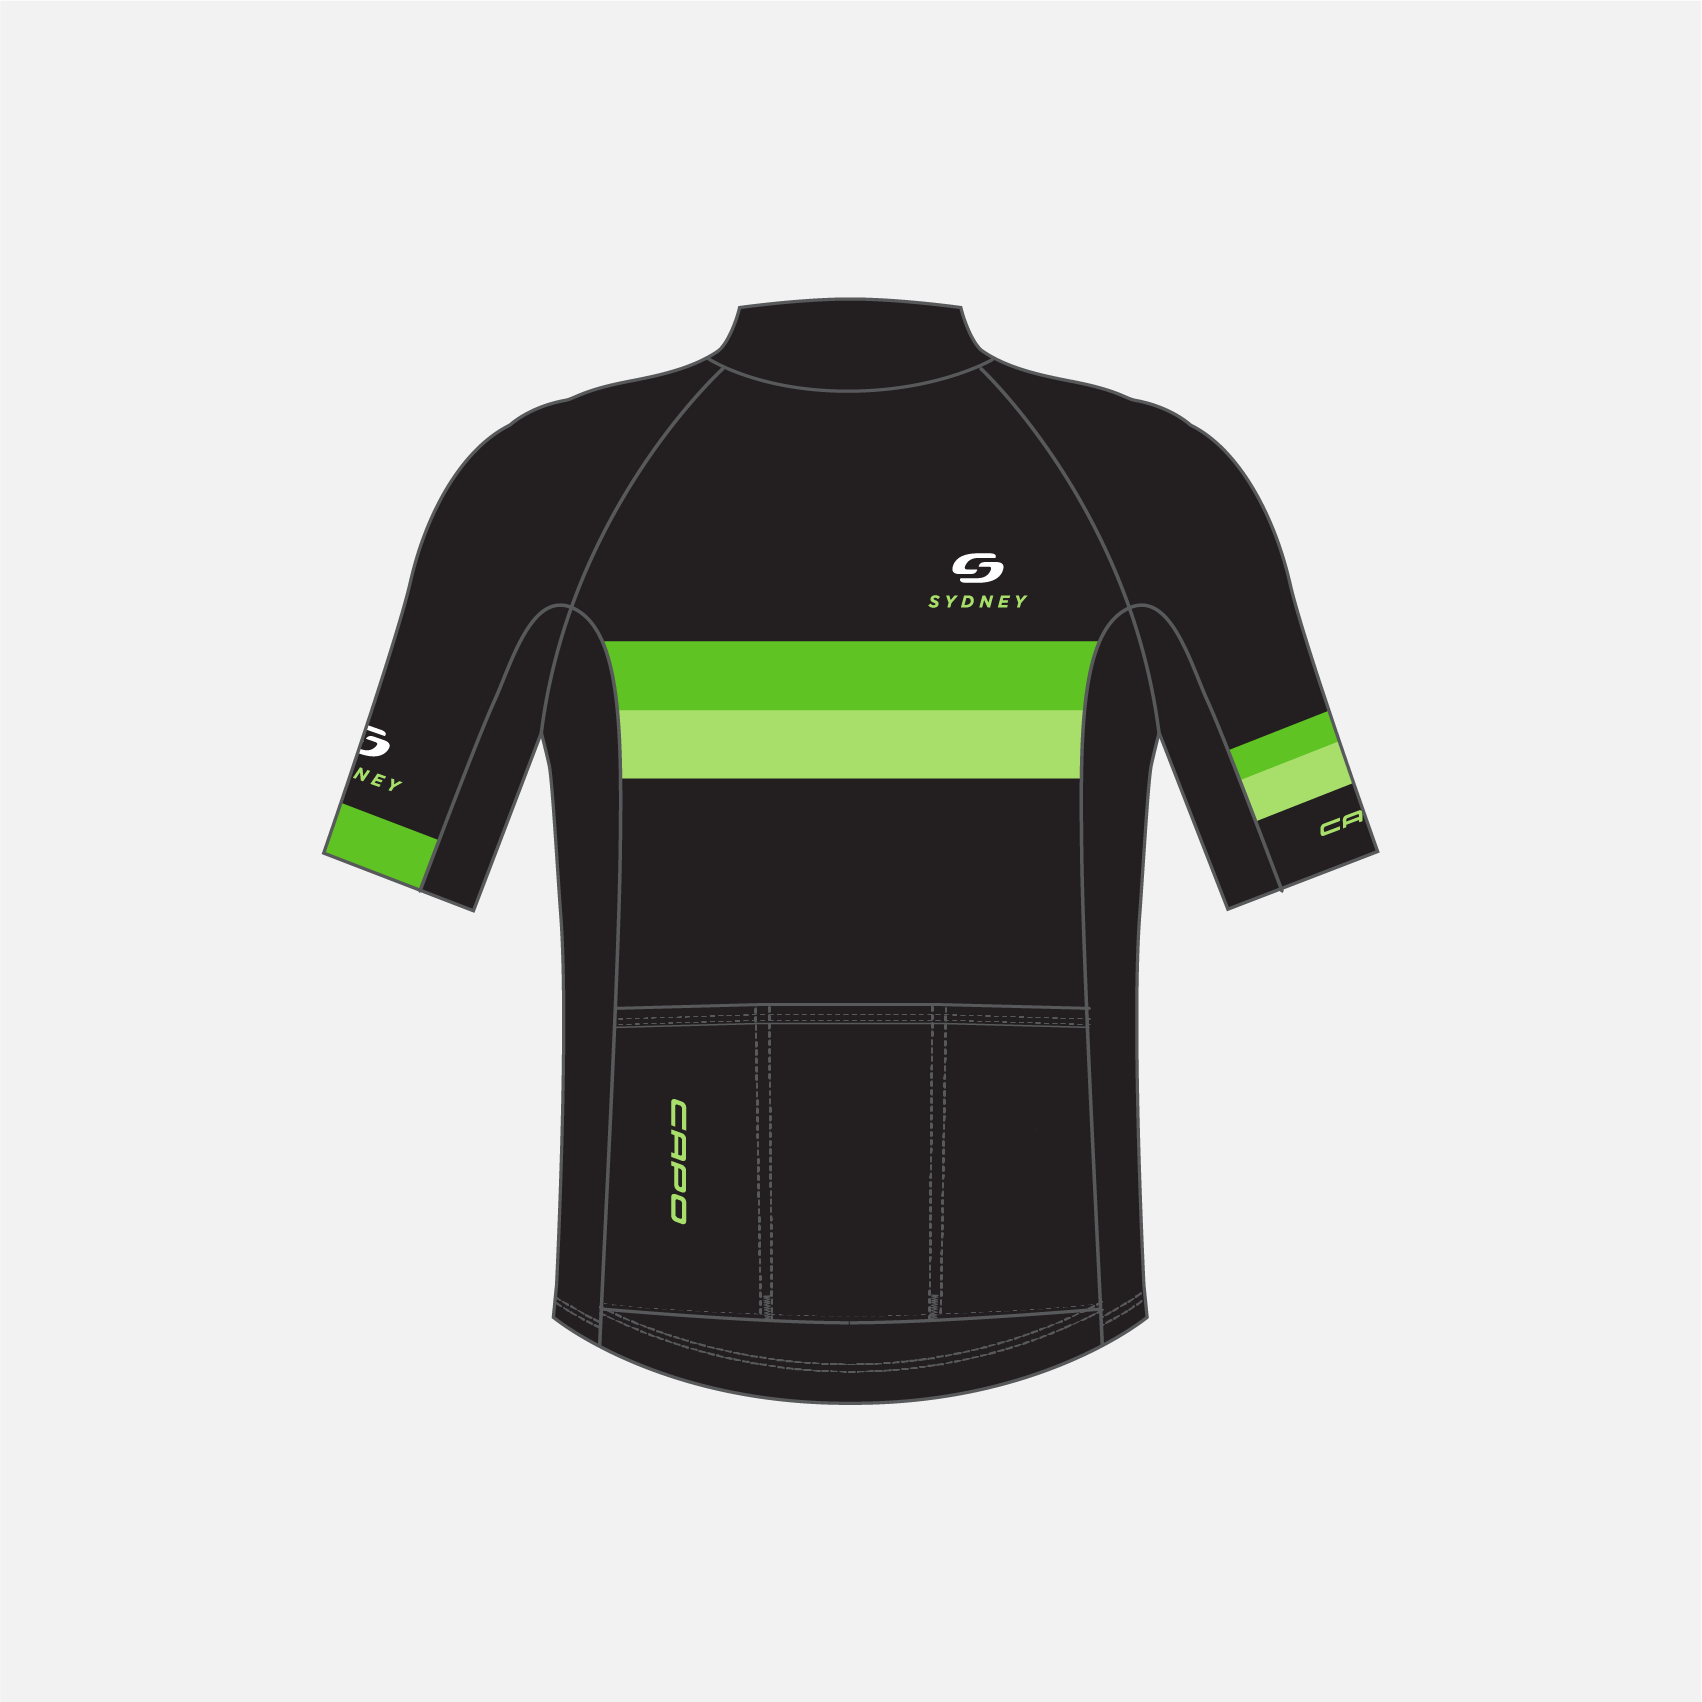 Clarence St Cyclery x Capo Shop Jersey Black